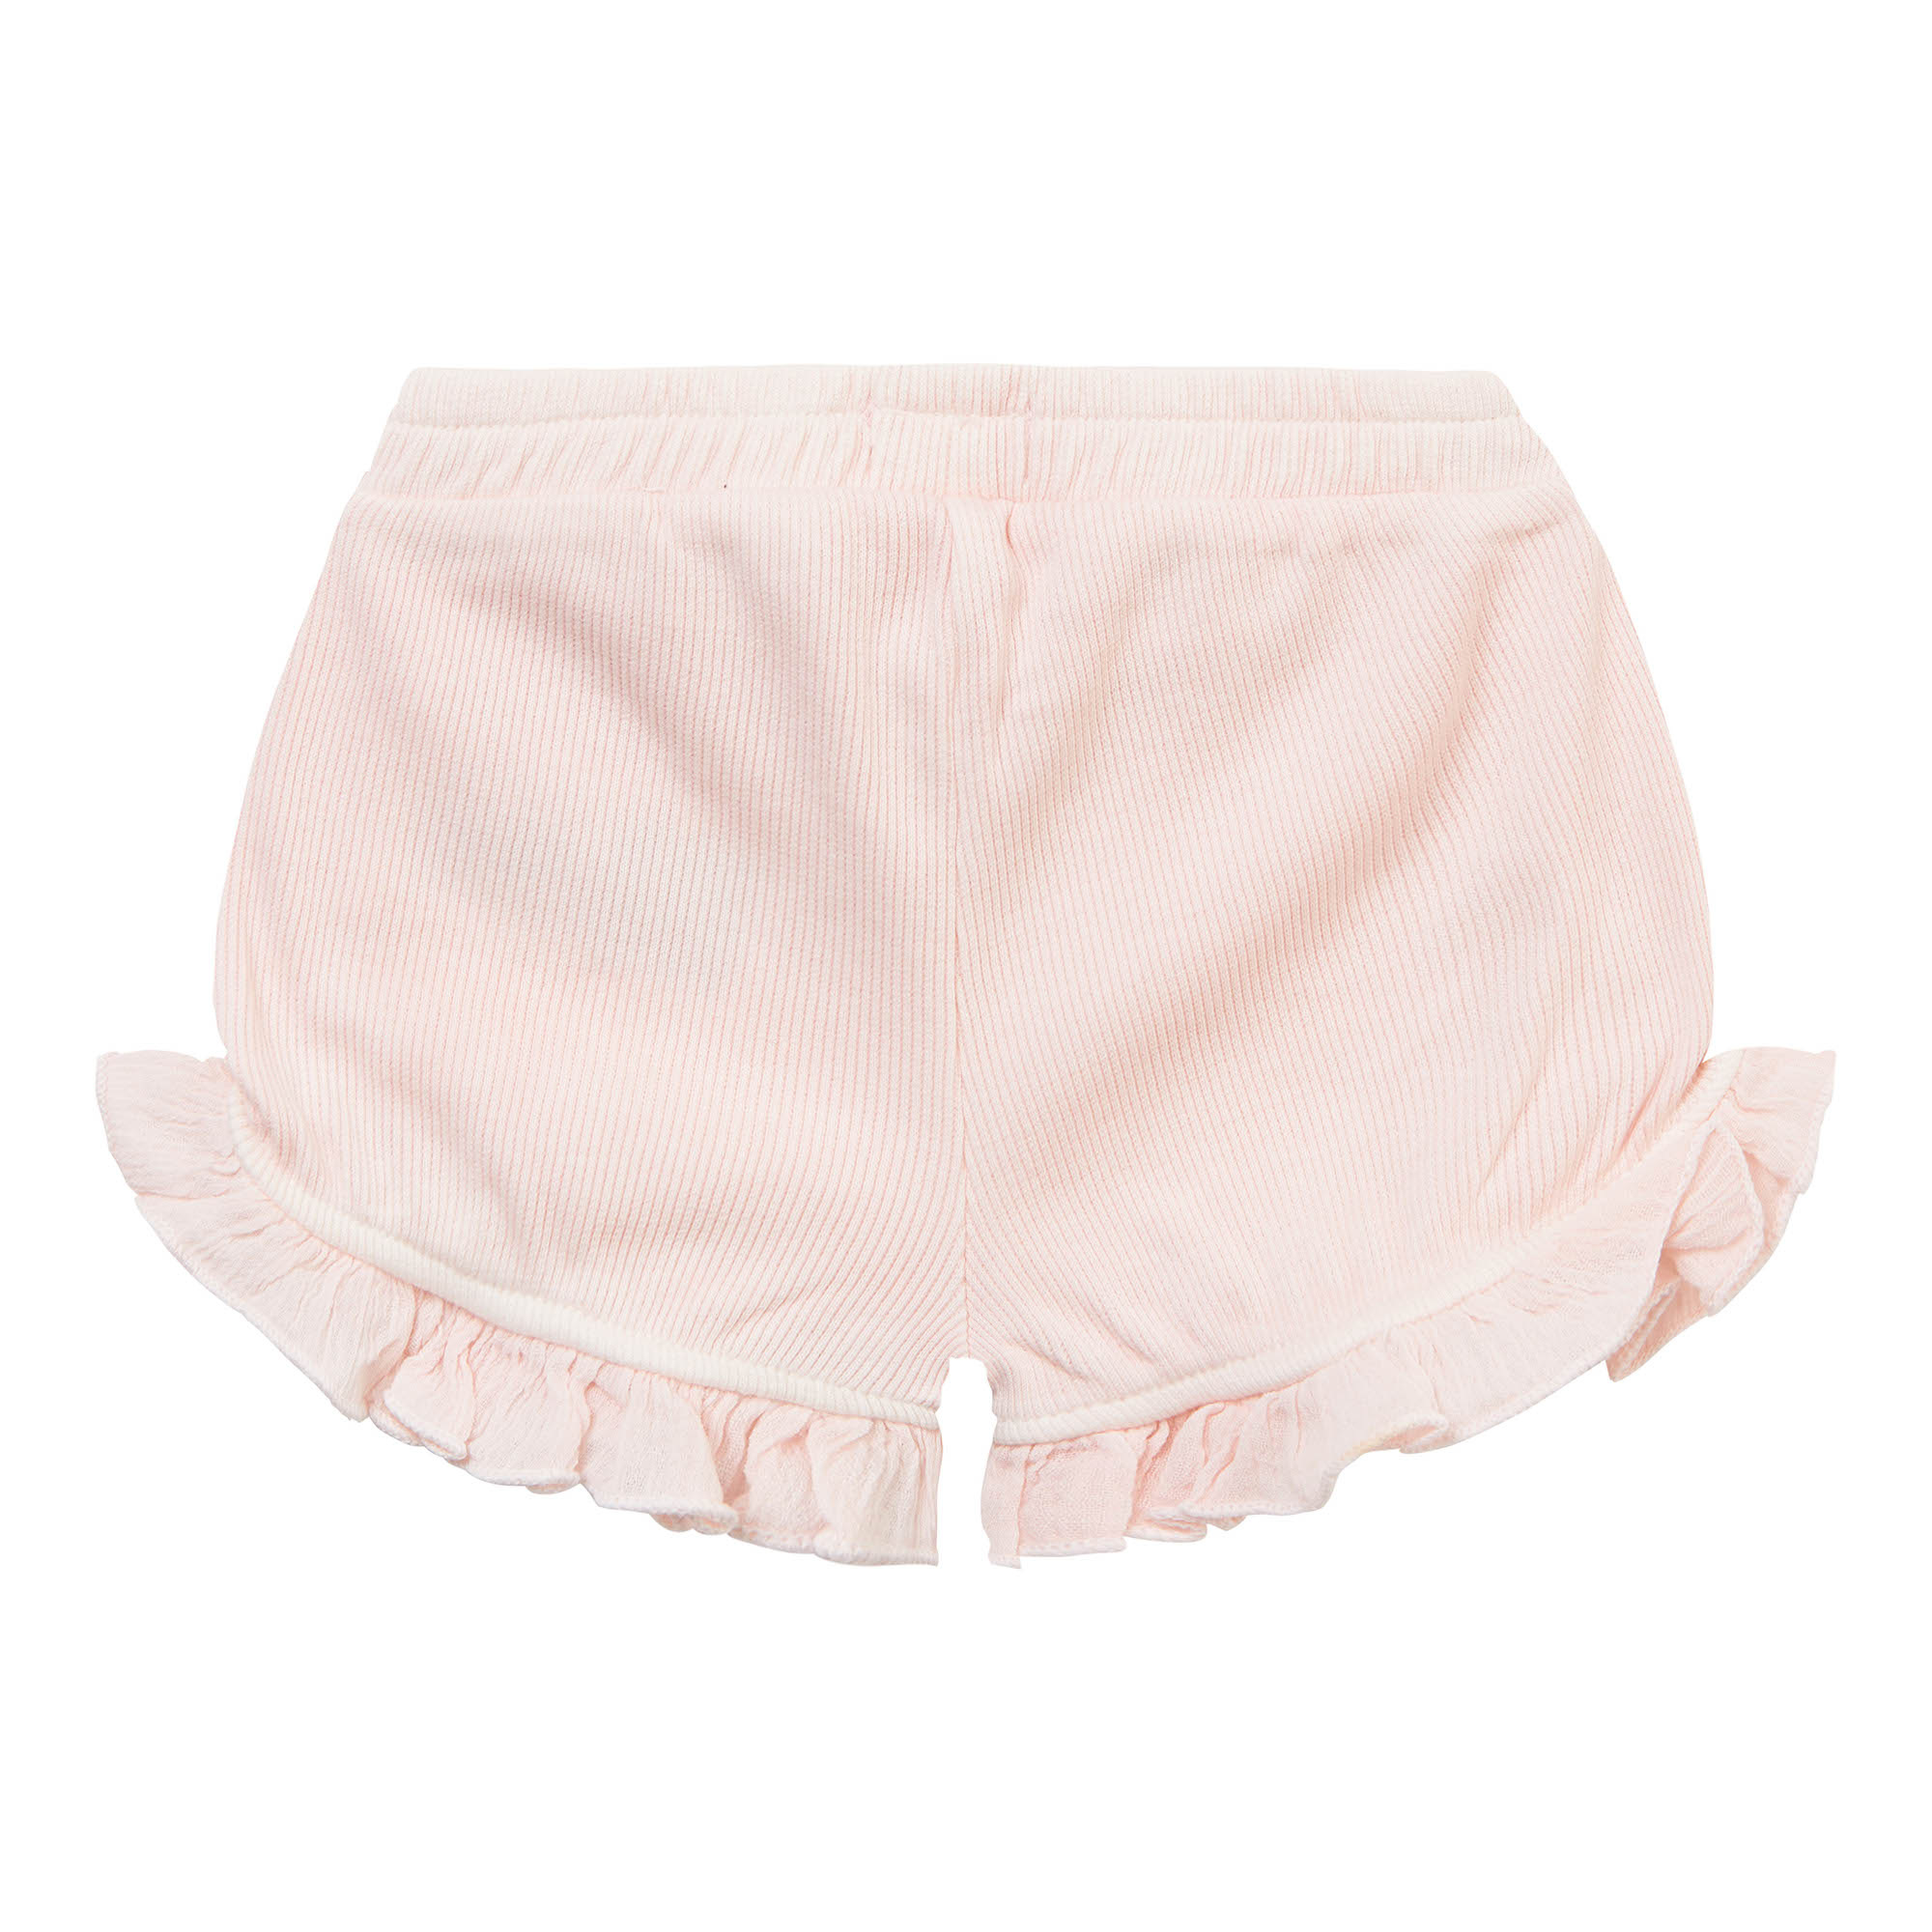 Shorts Narbonne noppies Rosa M2000584427000 2